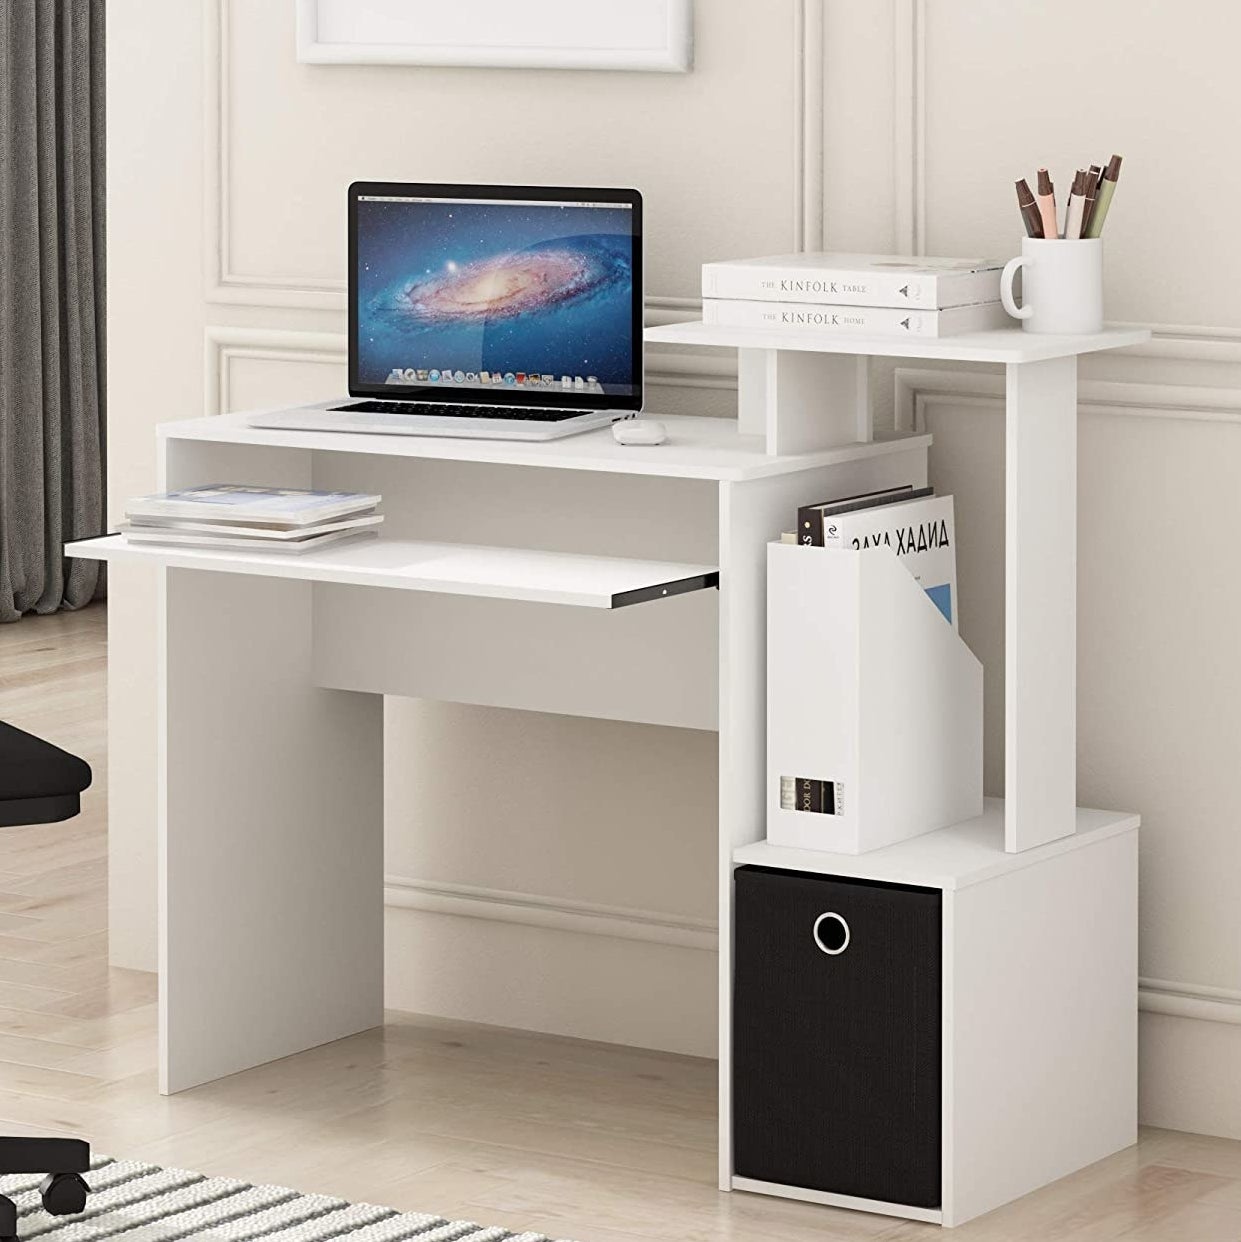 The computer desk with a laptop, books, and files on it